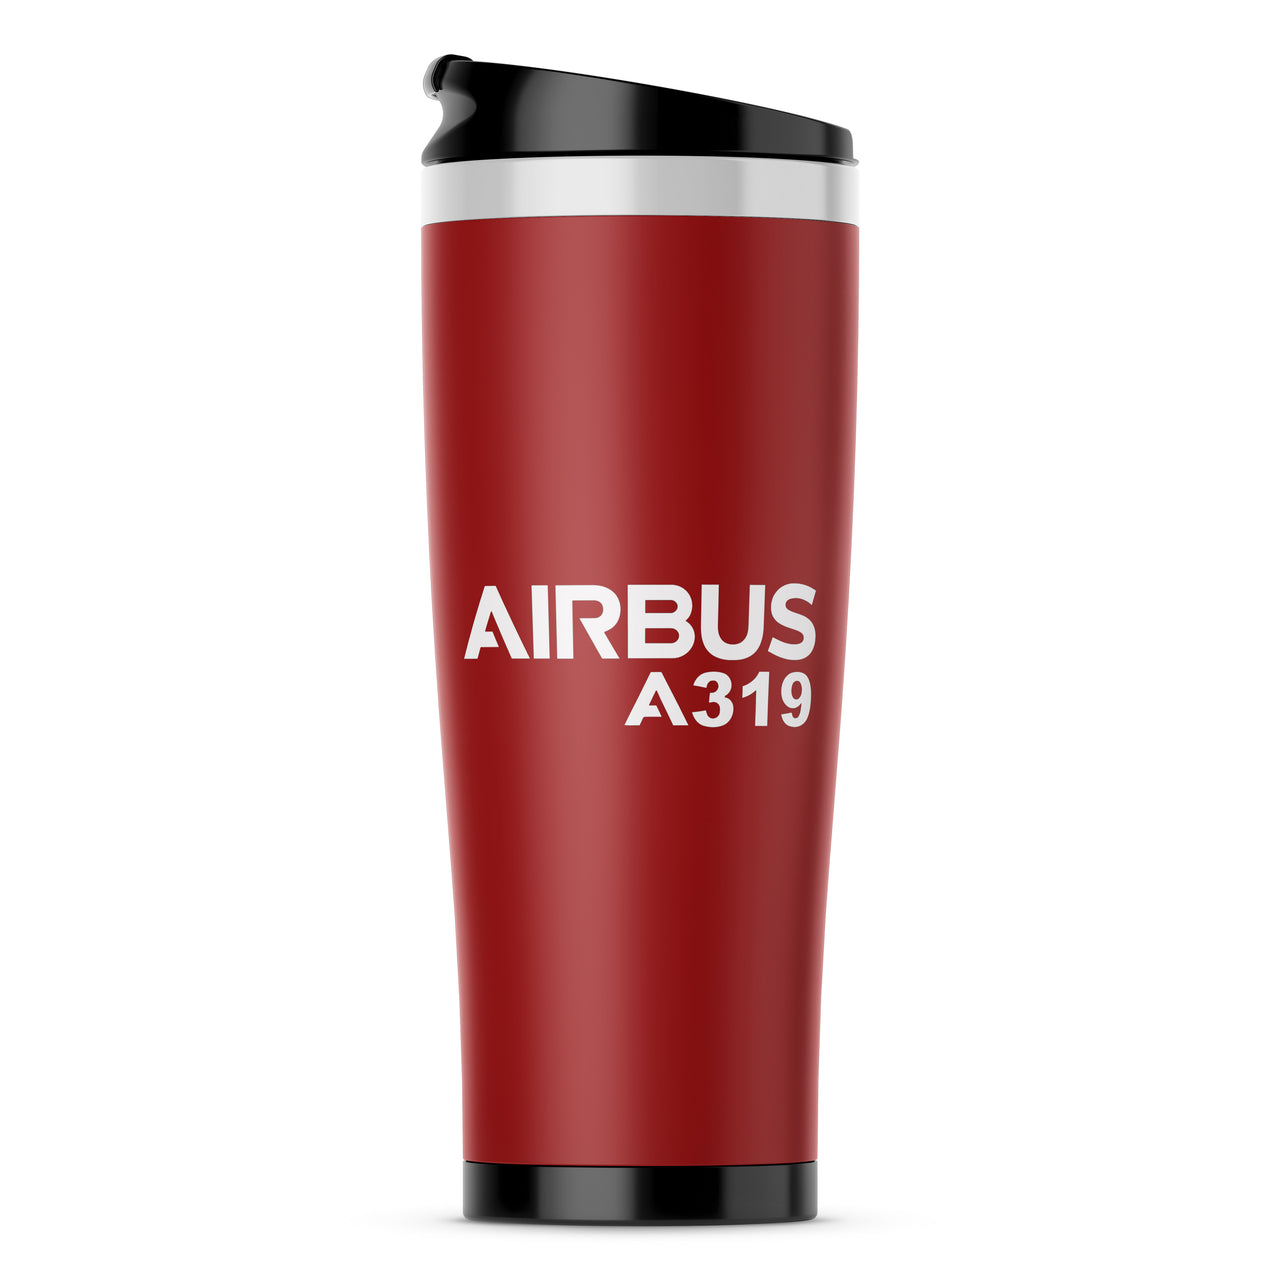 Airbus A319 & Text Designed Travel Mugs